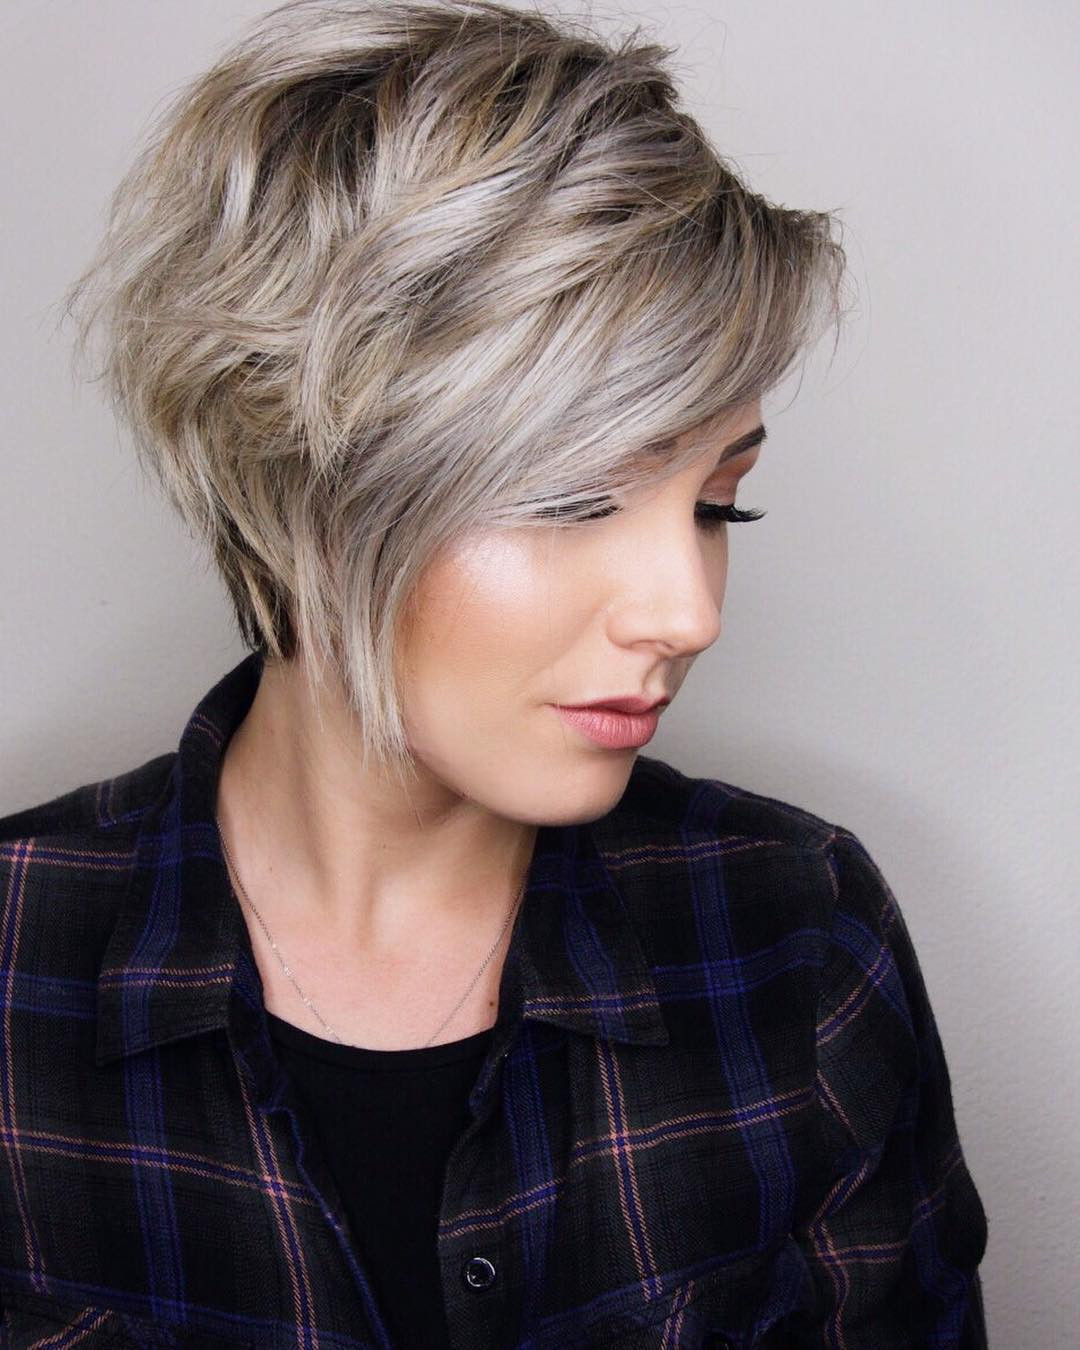 Short Hairstyles For Thick Hair
 10 Trendy Layered Short Haircut Ideas 2020 Extra